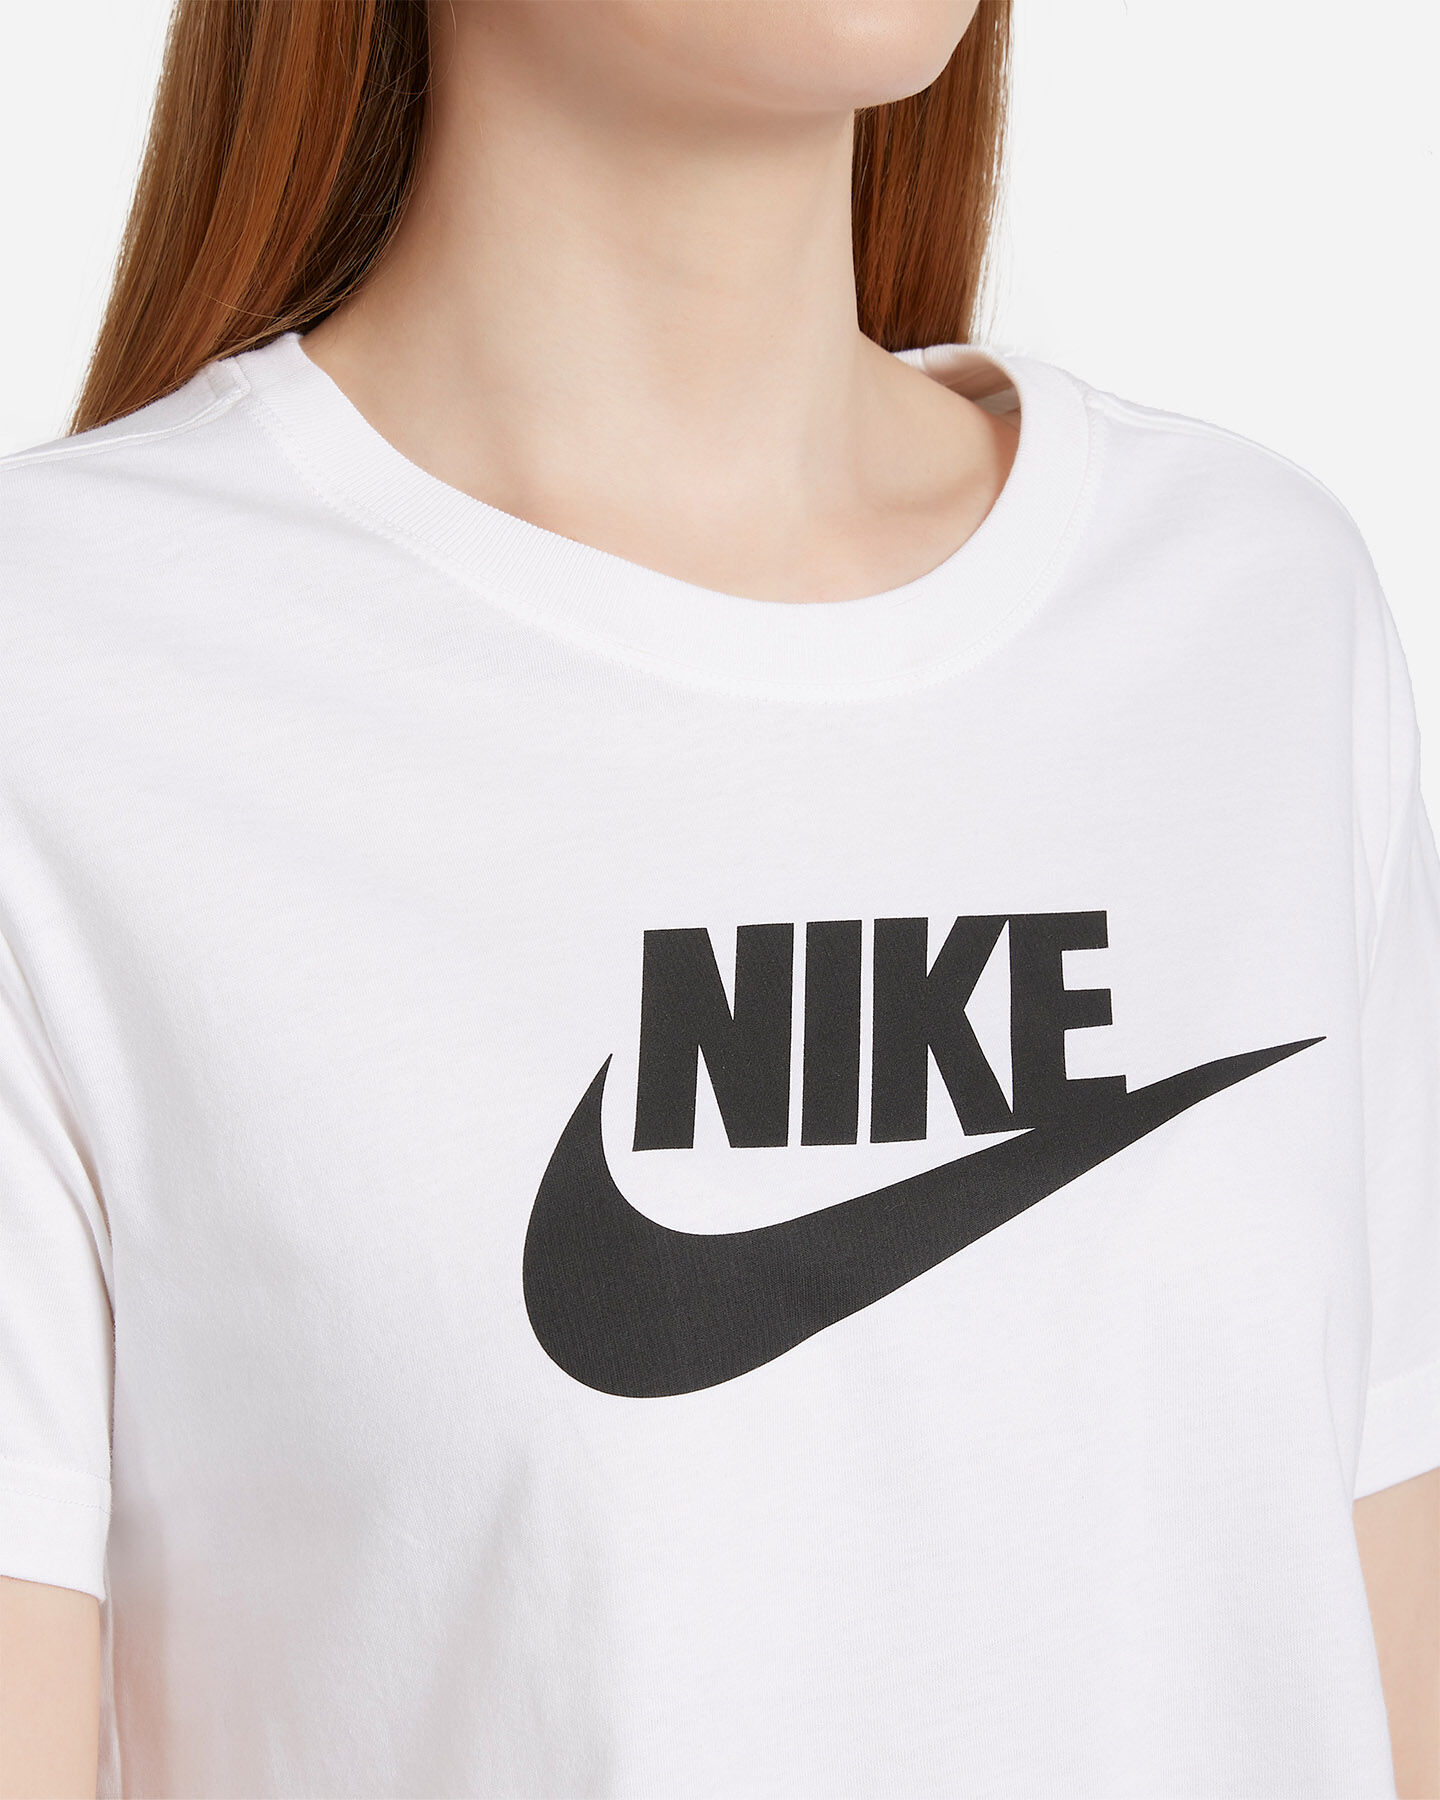  T-Shirt NIKE ESSENTIAL W S2024313 scatto 4